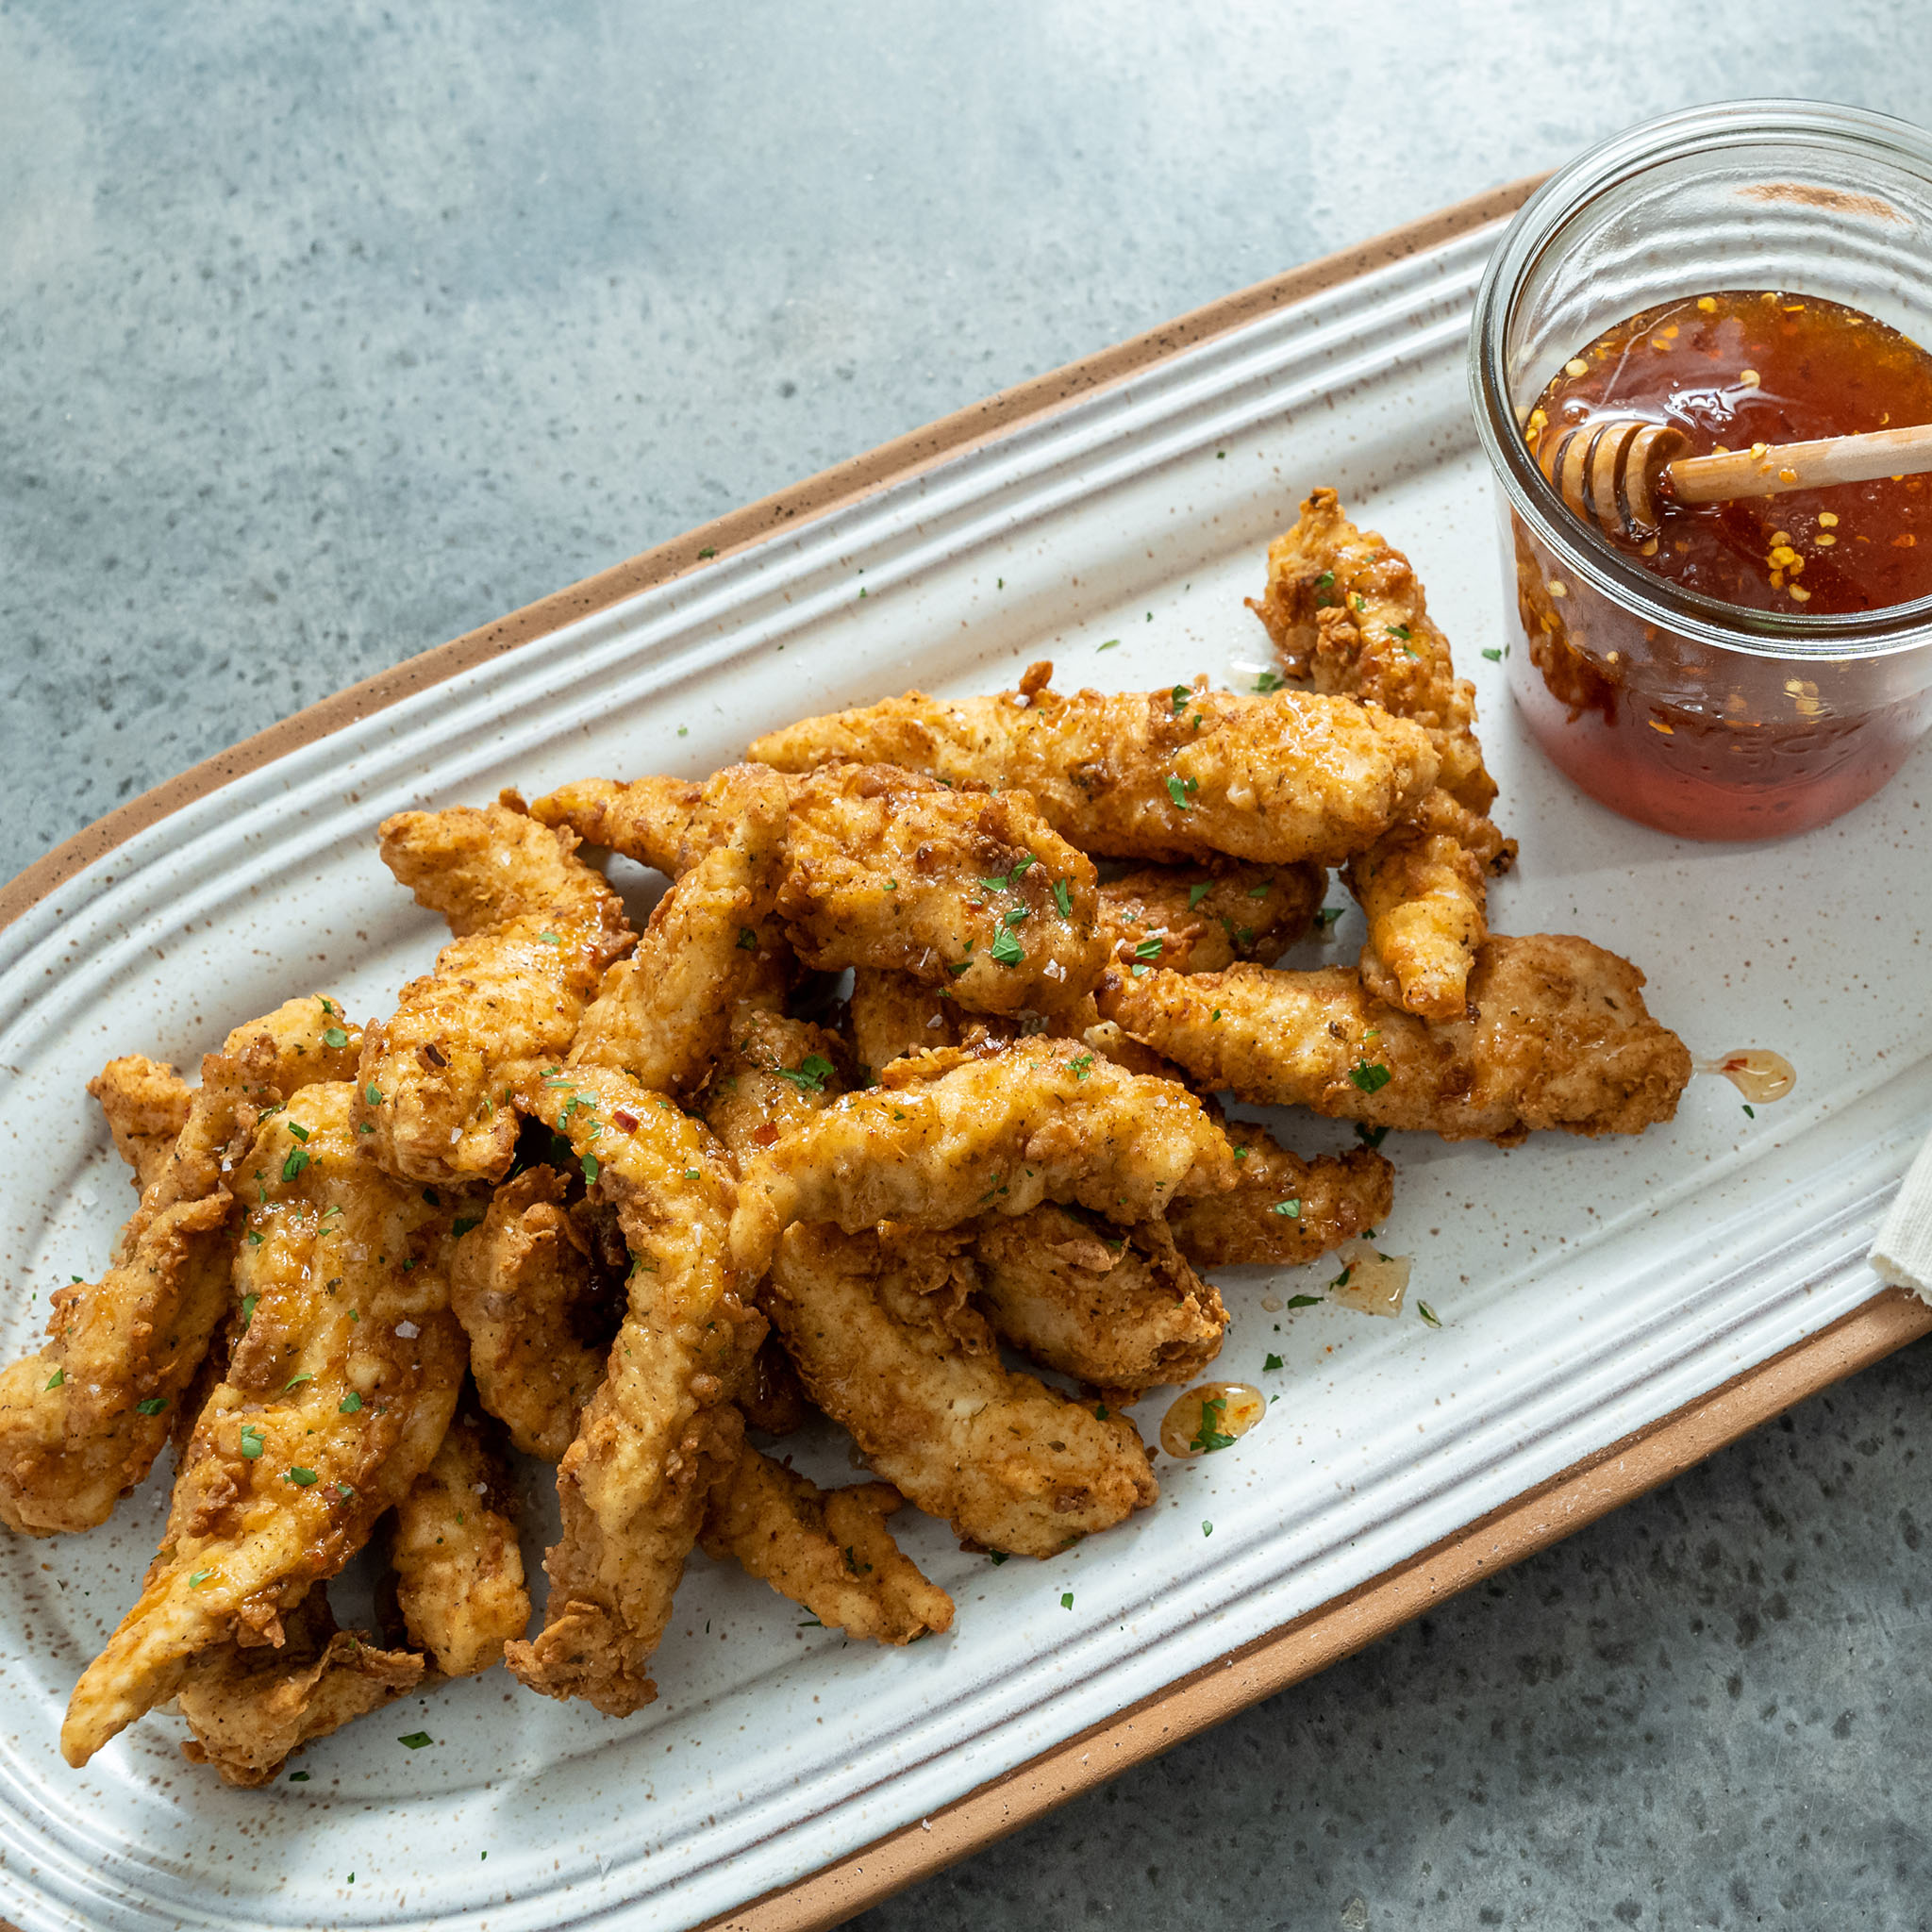 Joanna Gaines' Chicken tenders and spicy honey